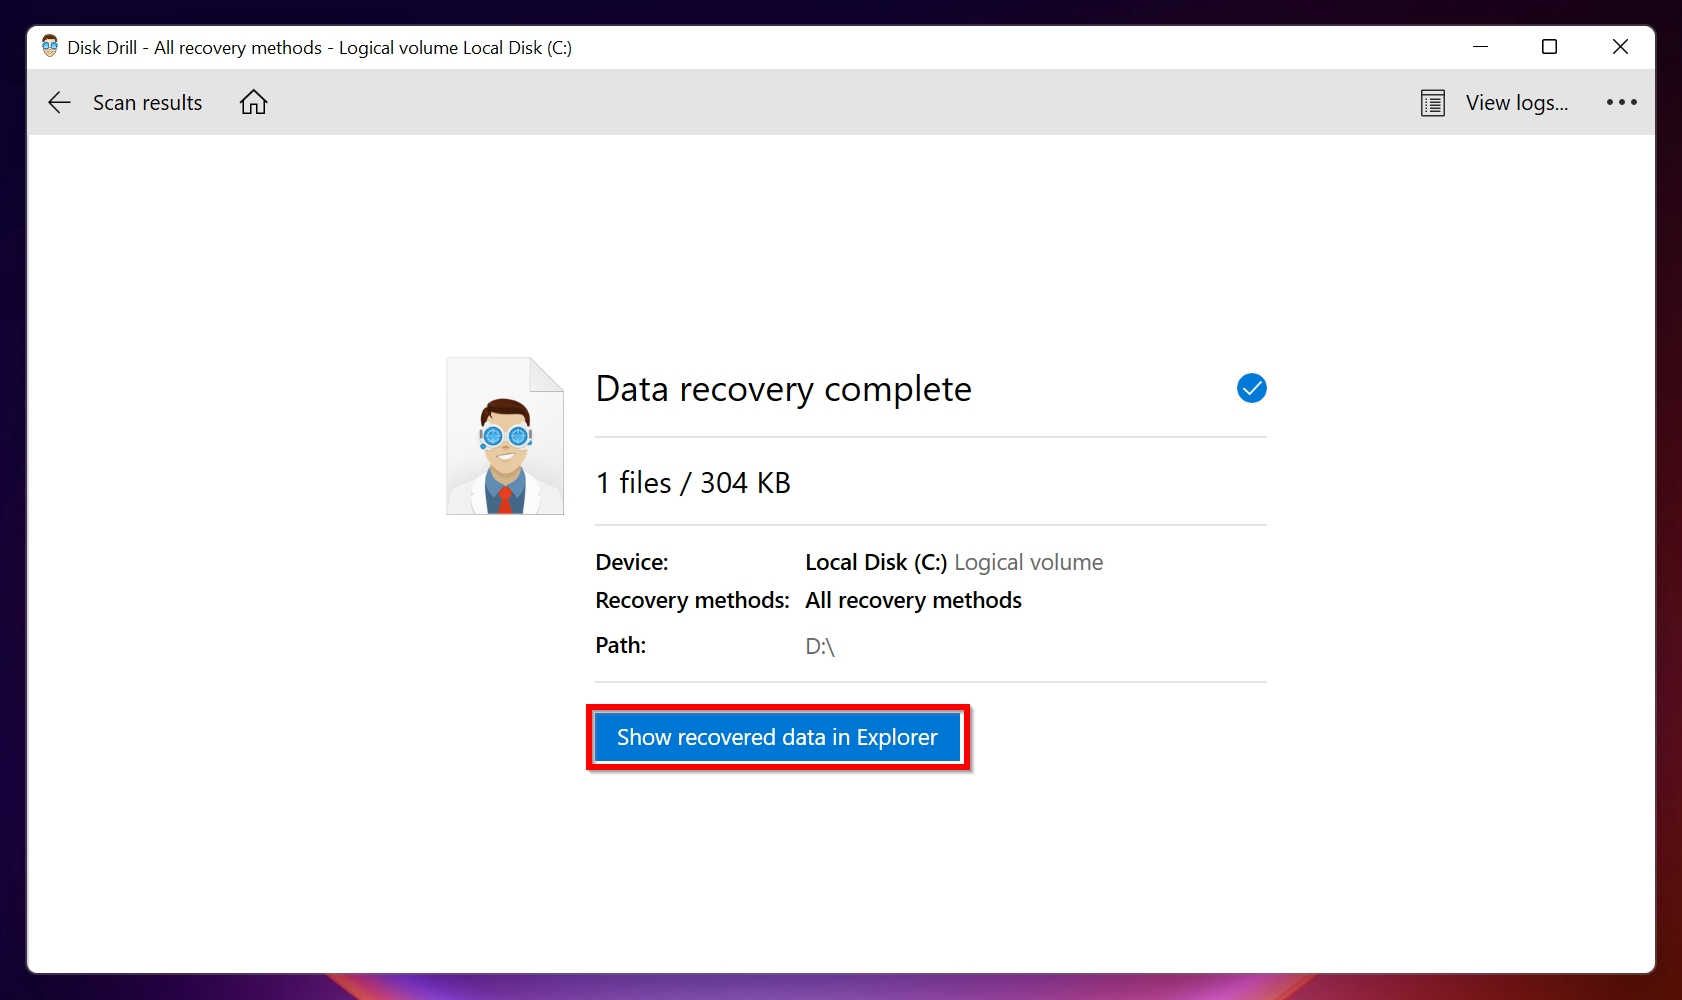 File recovery complete screen in Disk Drill.